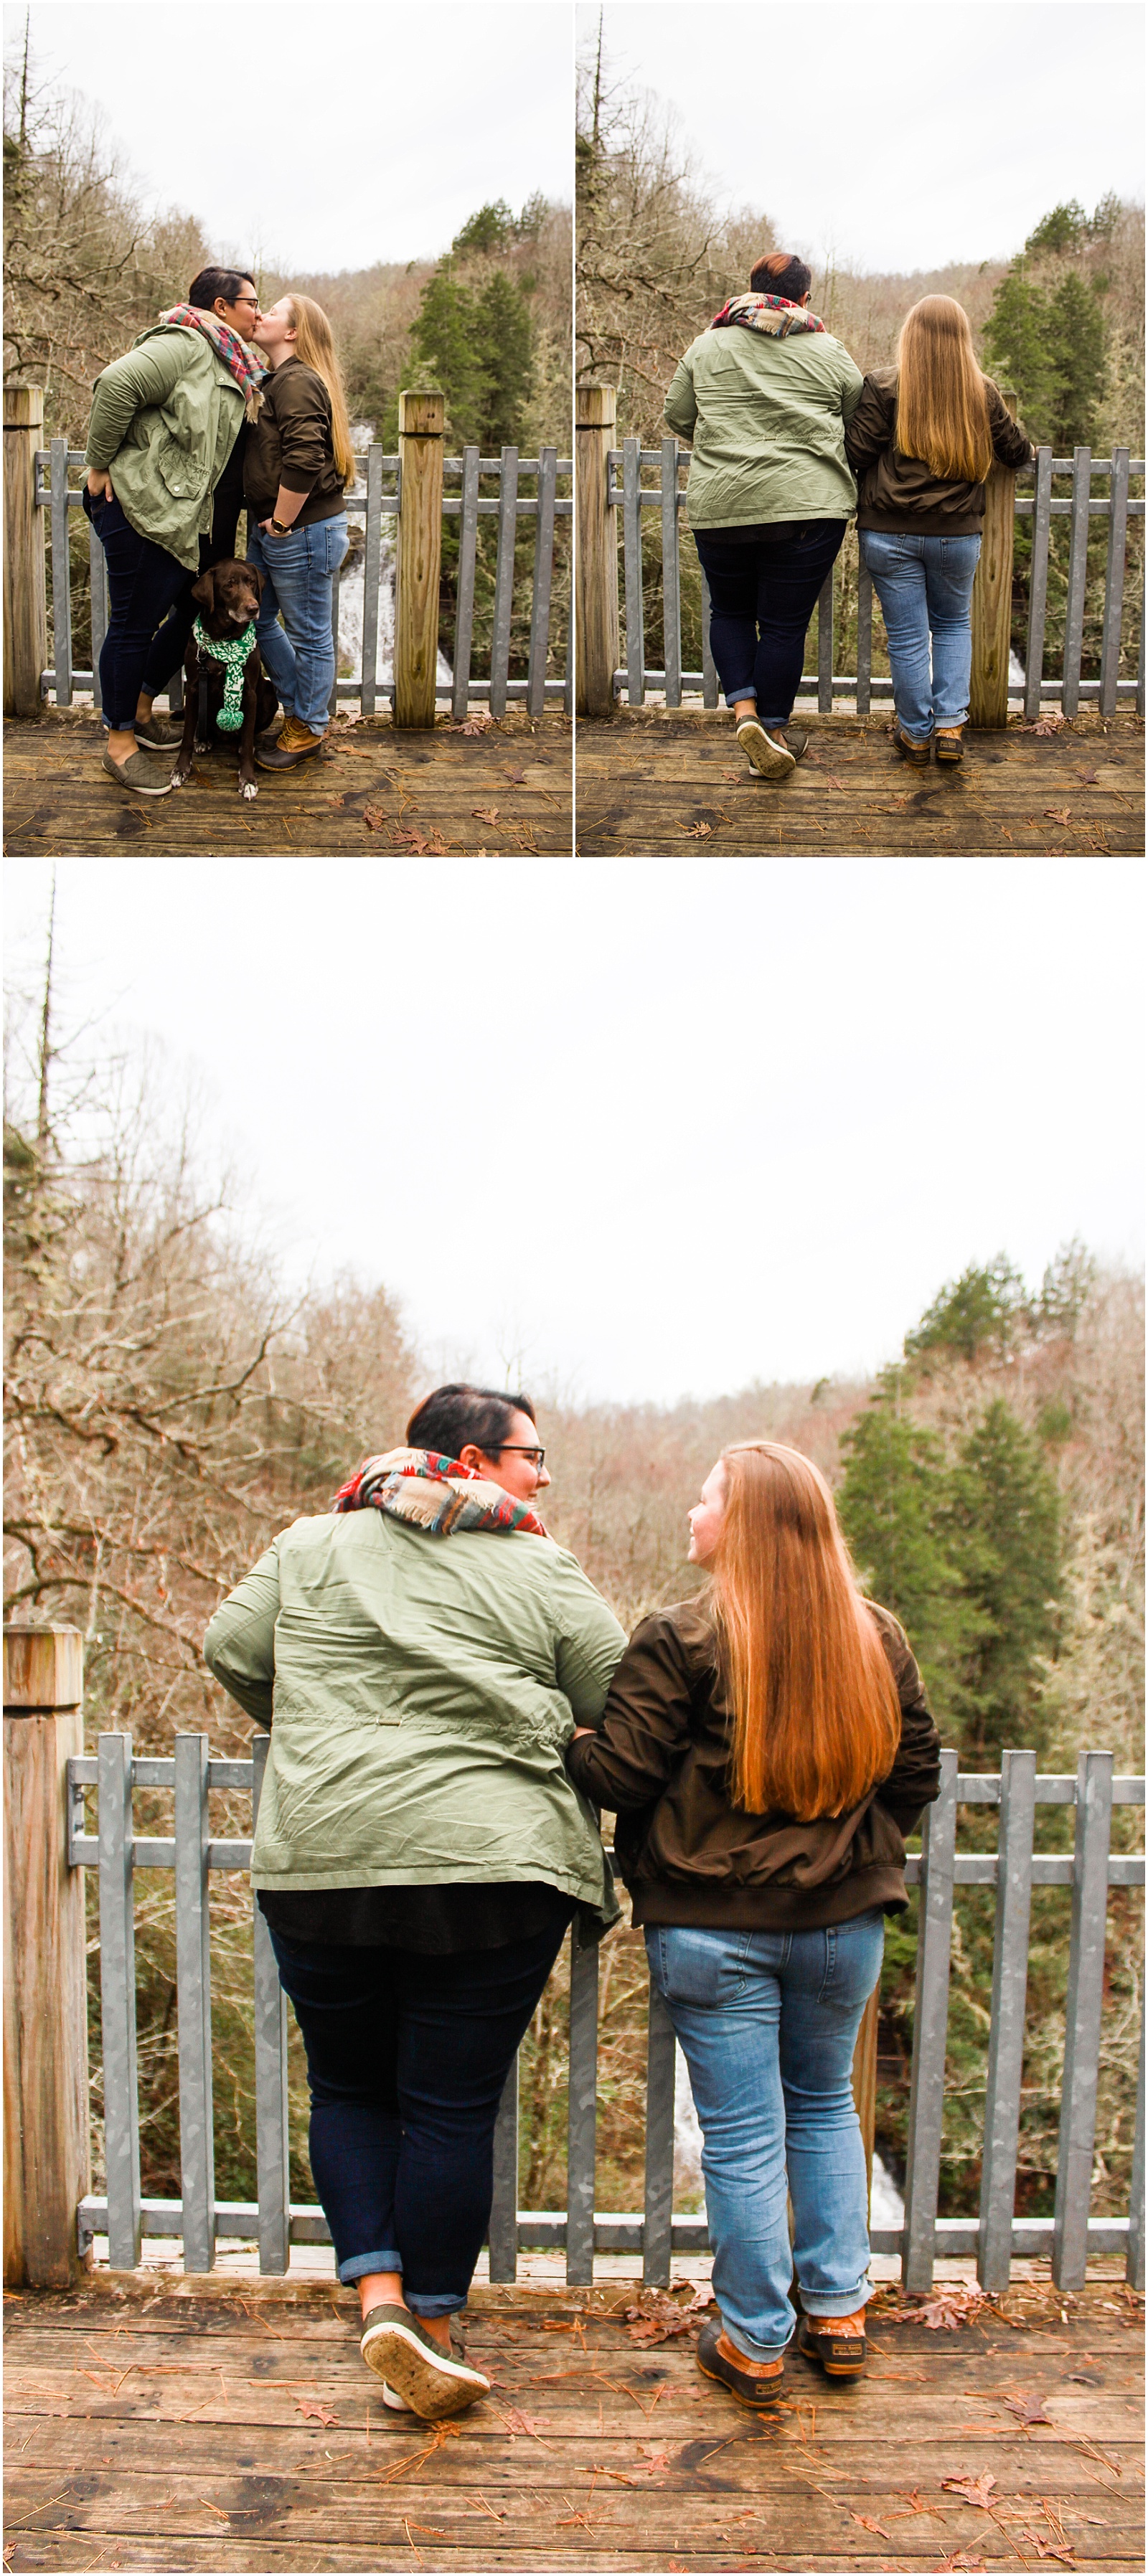 Our Engagement | Alyssa Brooke Photography - 2